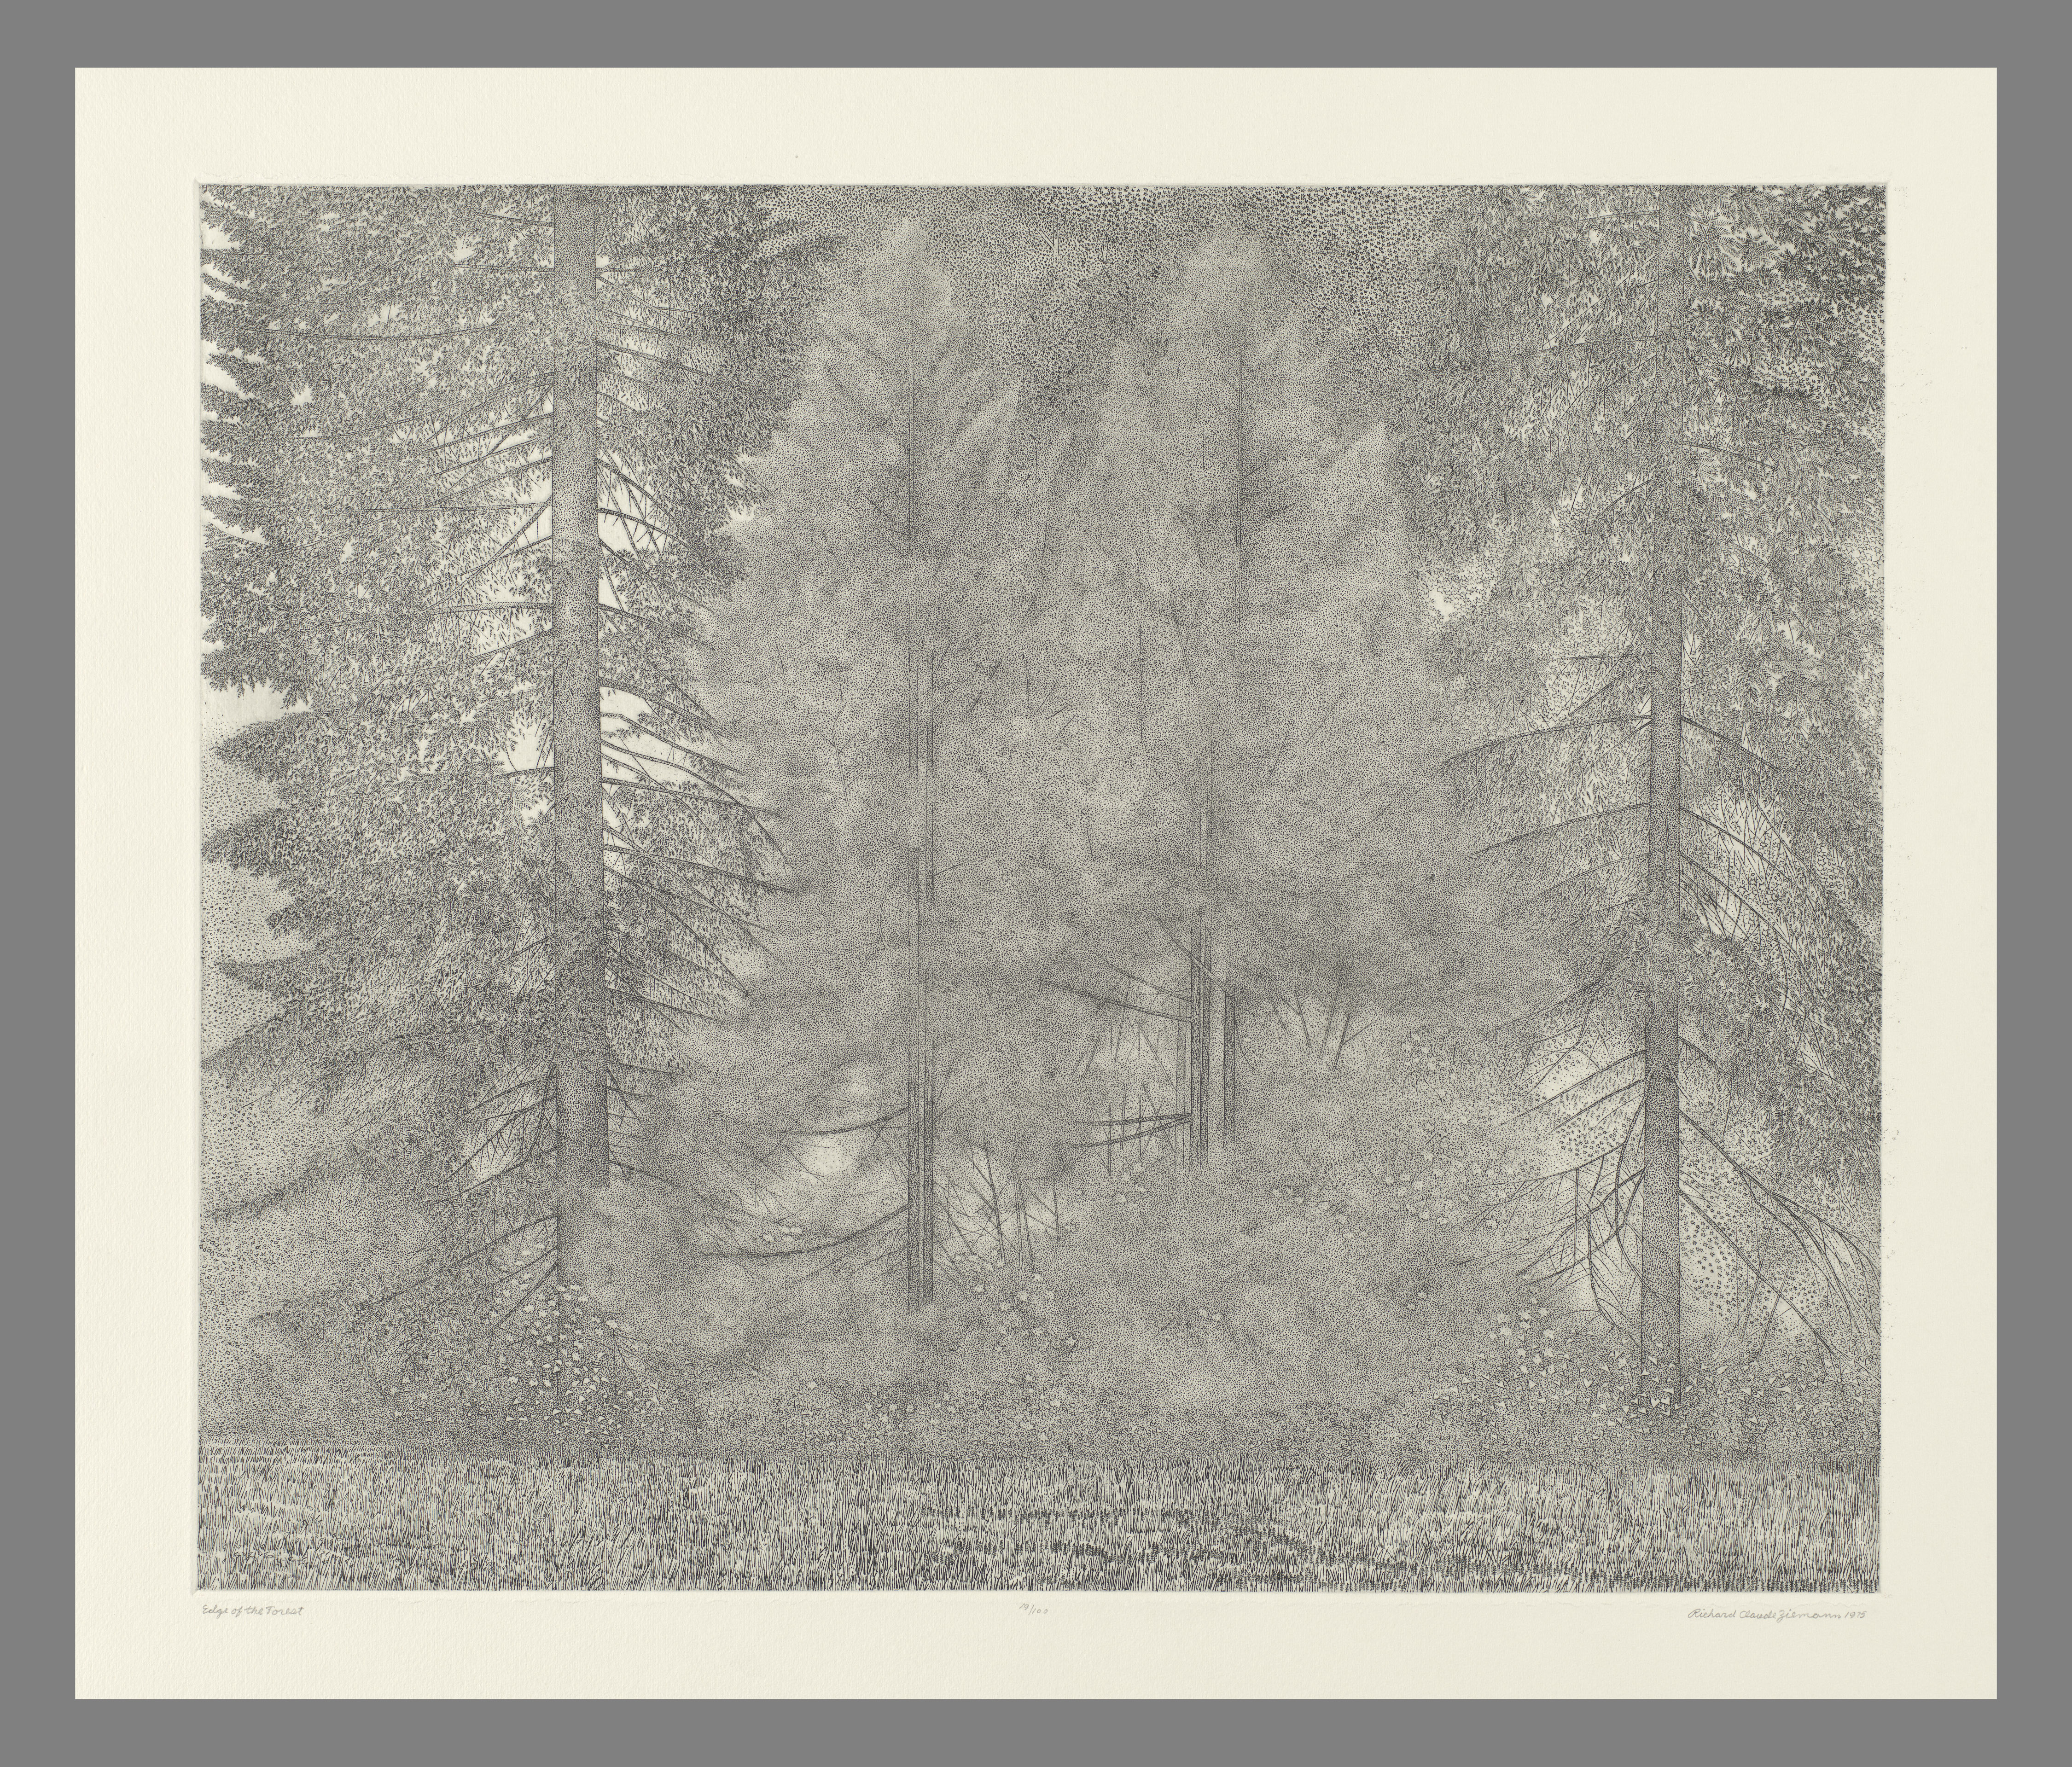 Richard Claude Ziemann, "Edge of the Forest," 1975, Etching, 20 x 24 inches